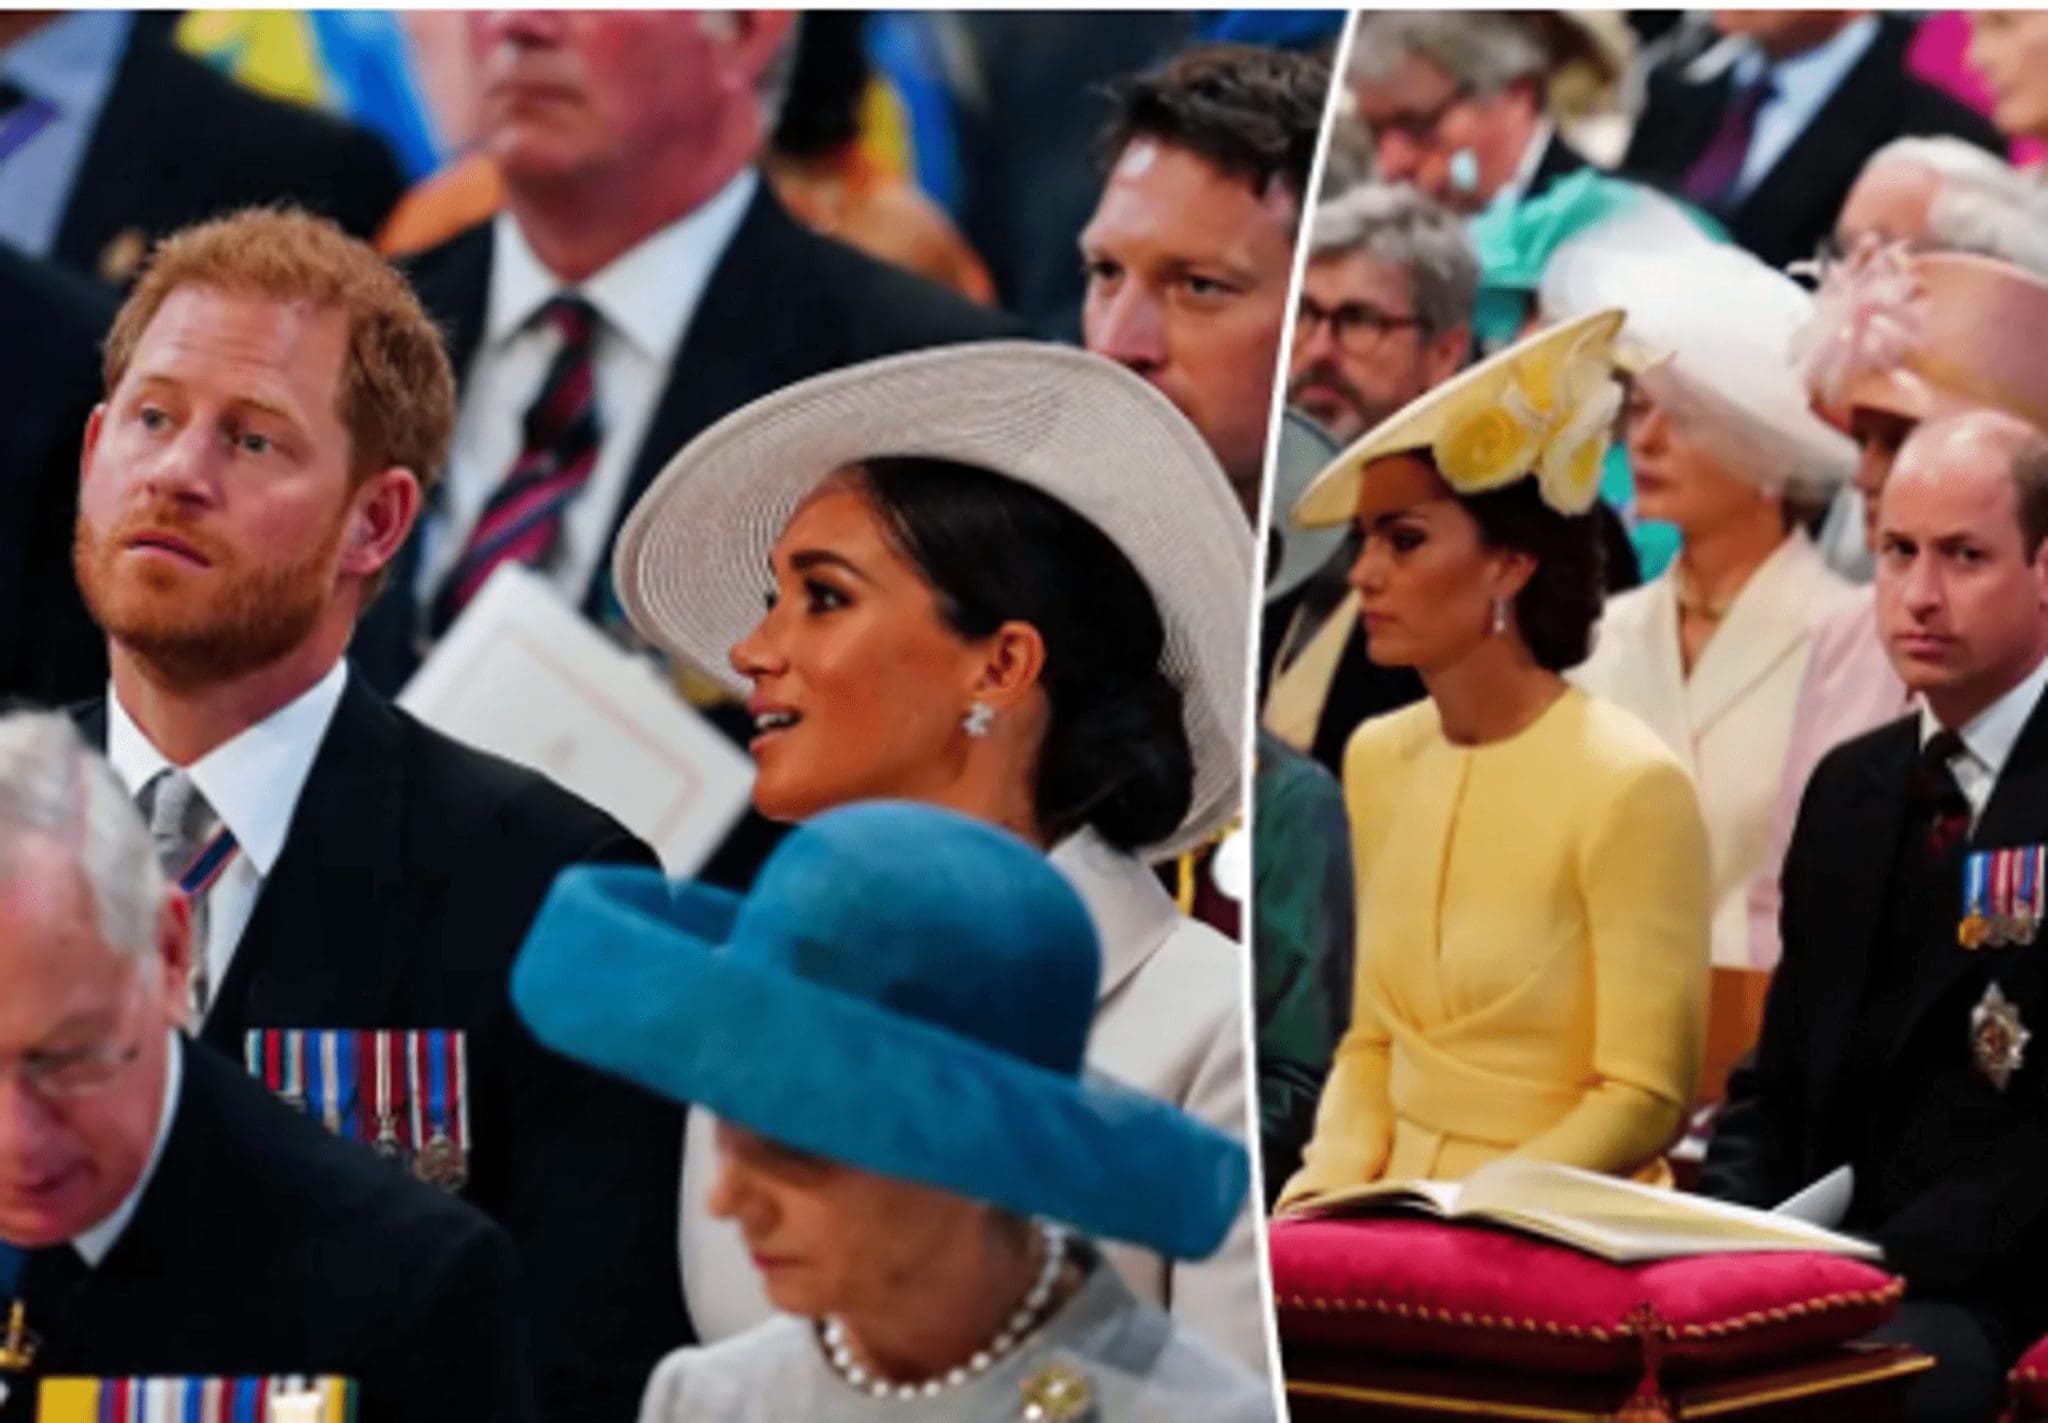 Kate Middleton and Prince William sat away from Meghan Markle and Prince Harry at the anniversary service